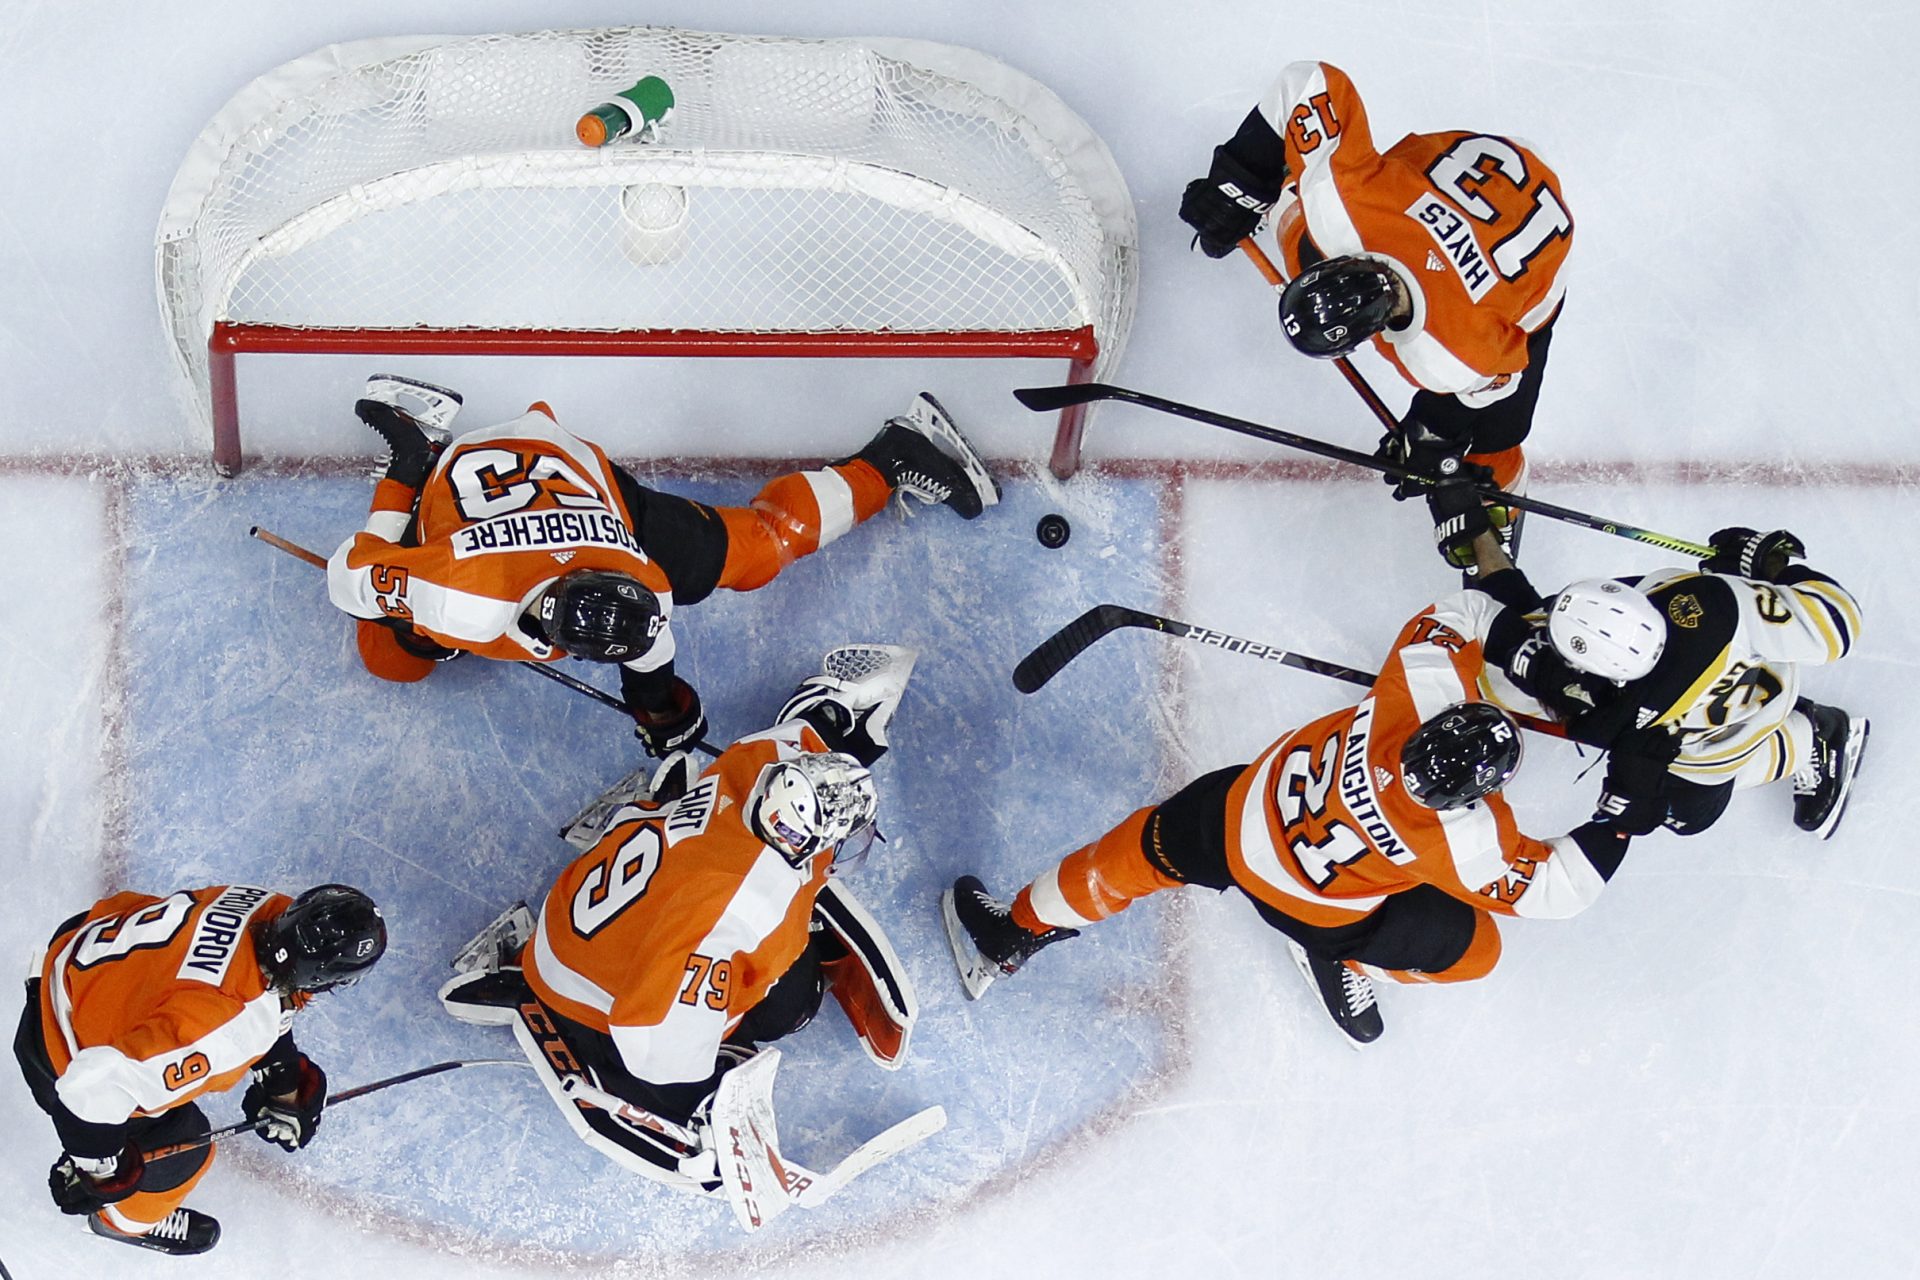 Boston Bruins' Brad Marchand (63) tries to score a goal past Philadelphia Flyers' Shayne Gostisbehere (53) as Scott Laughton (21), Kevin Hayes (13), Carter Hart (79) and Ivan Provorov (9) defend during the third period of an NHL hockey game, Tuesday, March 10, 2020, in Philadelphia.